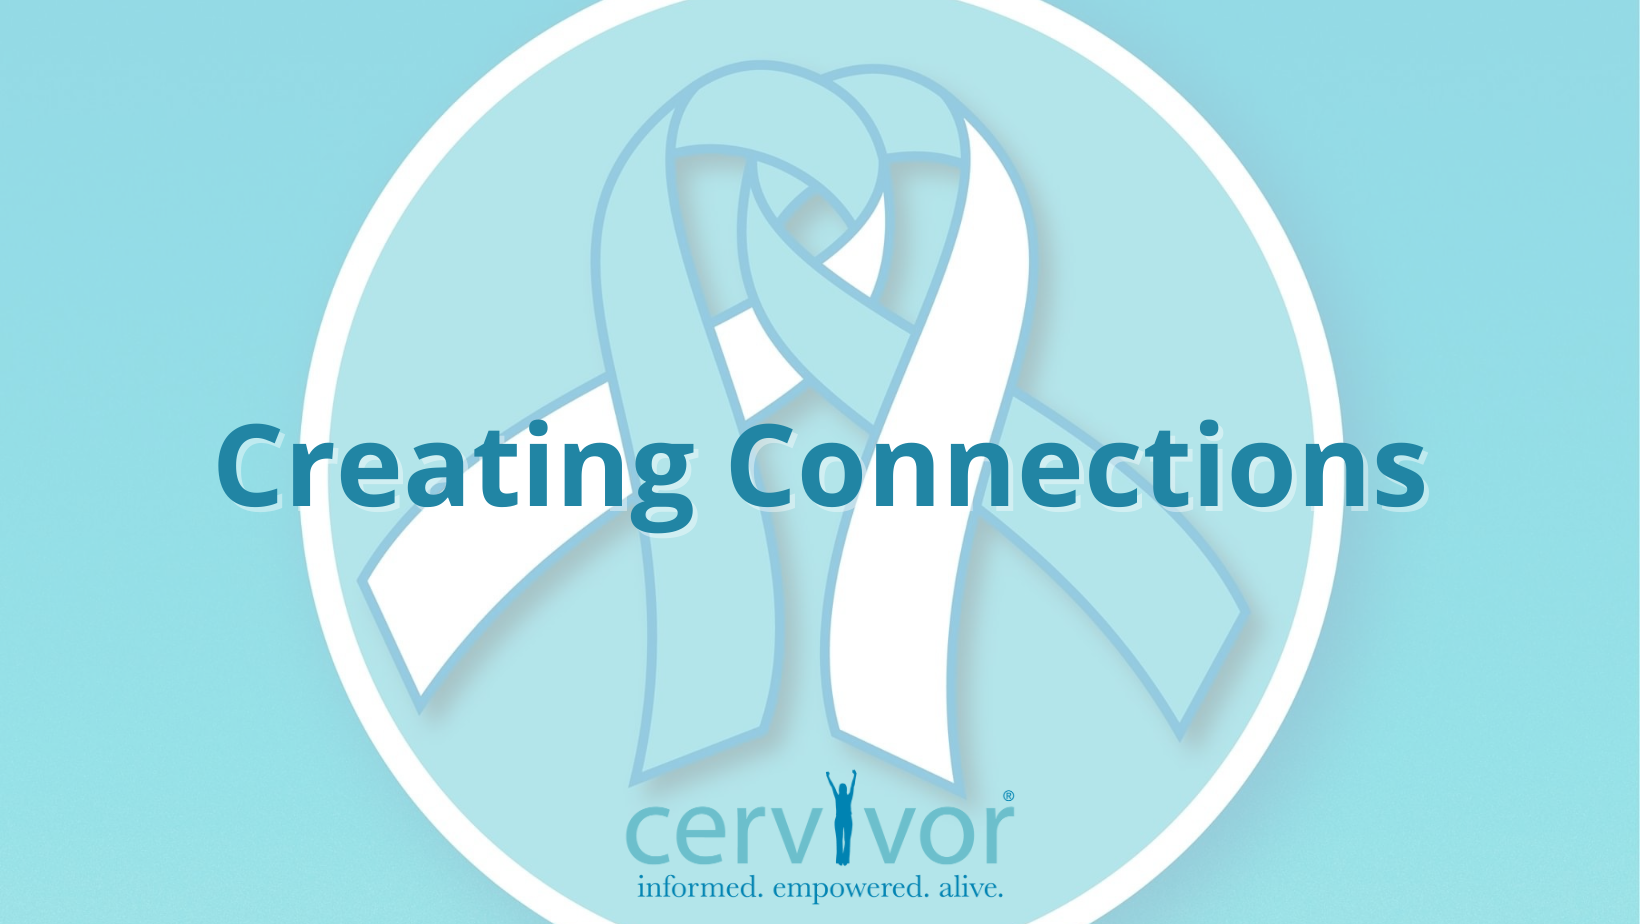 Creating Connections February MeetUp Cervivor